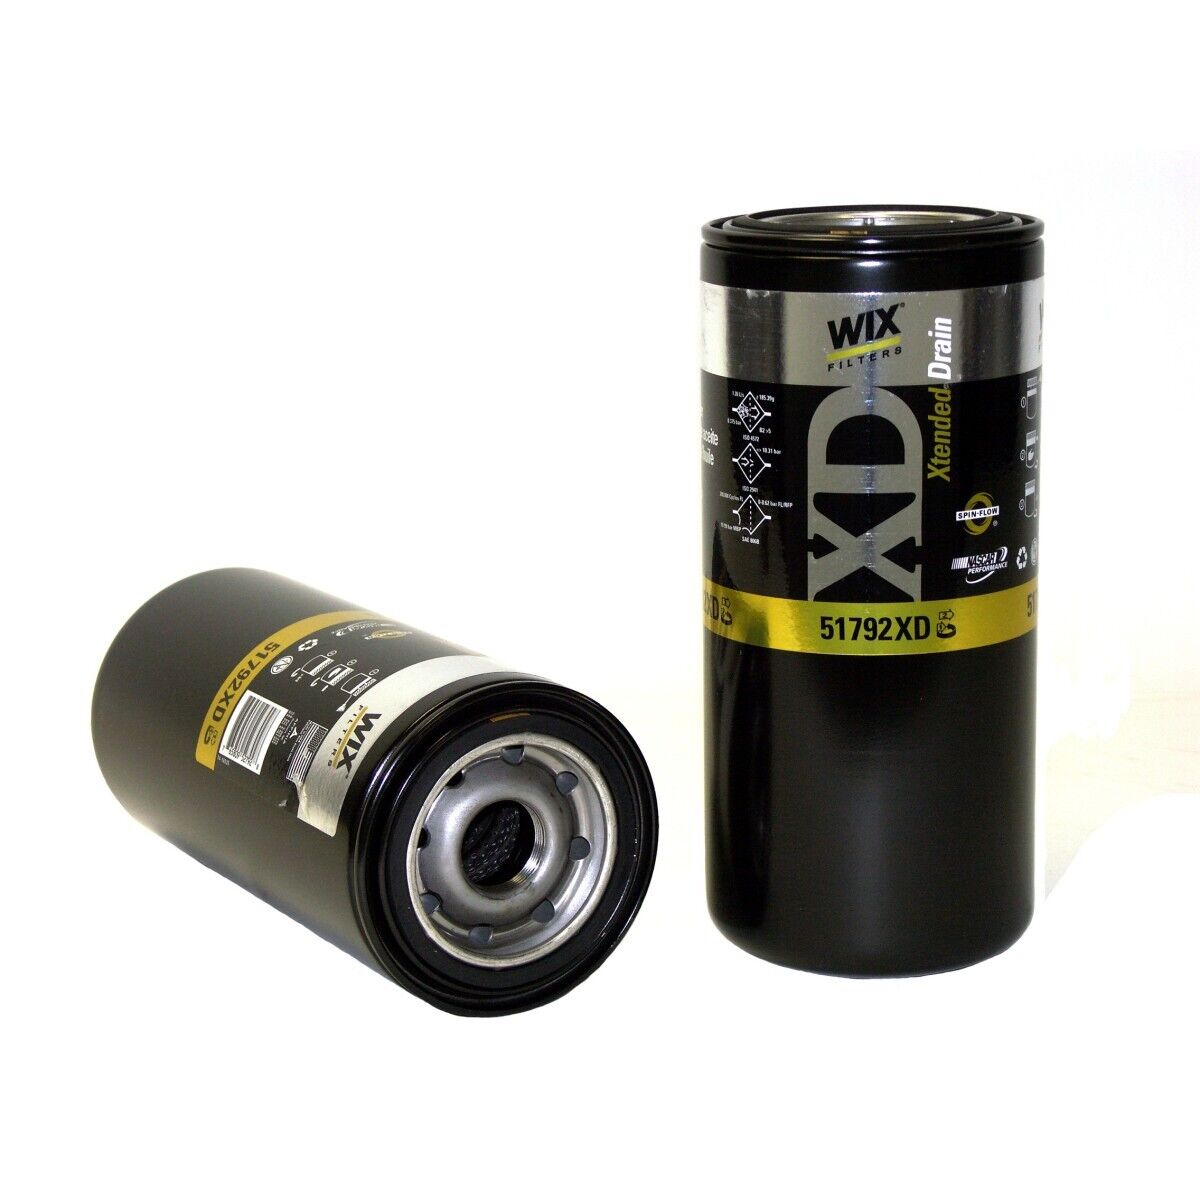 51792XD WIX Oil Filter for Ford A9513 A9522 AT9513 AT9522 CL9000 CLT9000 L9000